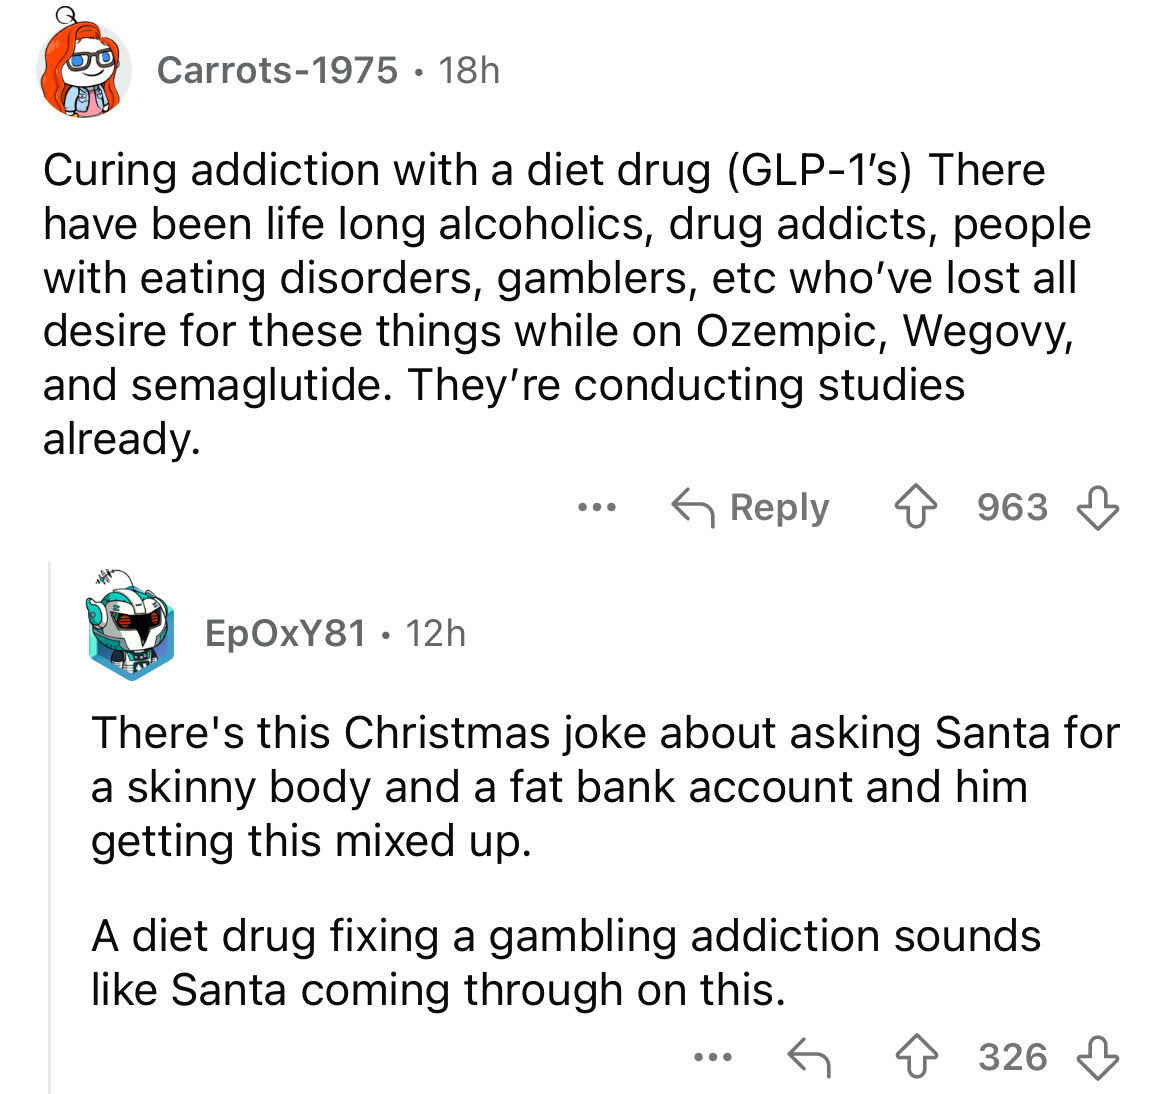 screenshot - Carrots1975 18h Curing addiction with a diet drug Glp1's There have been life long alcoholics, drug addicts, people with eating disorders, gamblers, etc who've lost all desire for these things while on Ozempic, Wegovy, and semaglutide. They'r